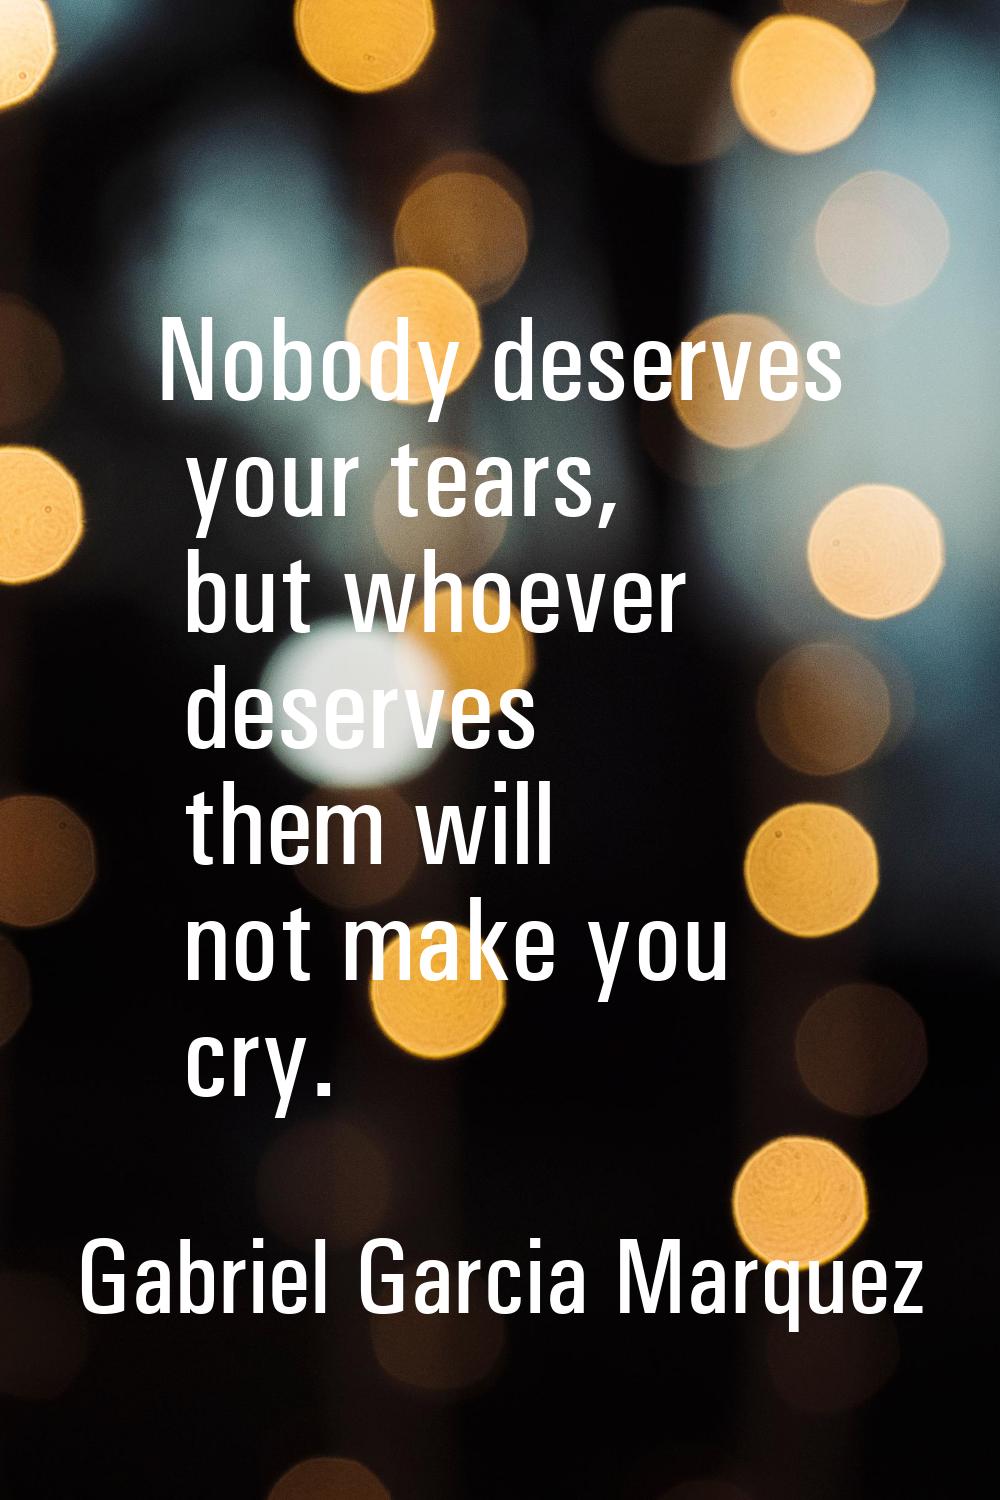 Nobody deserves your tears, but whoever deserves them will not make you cry.